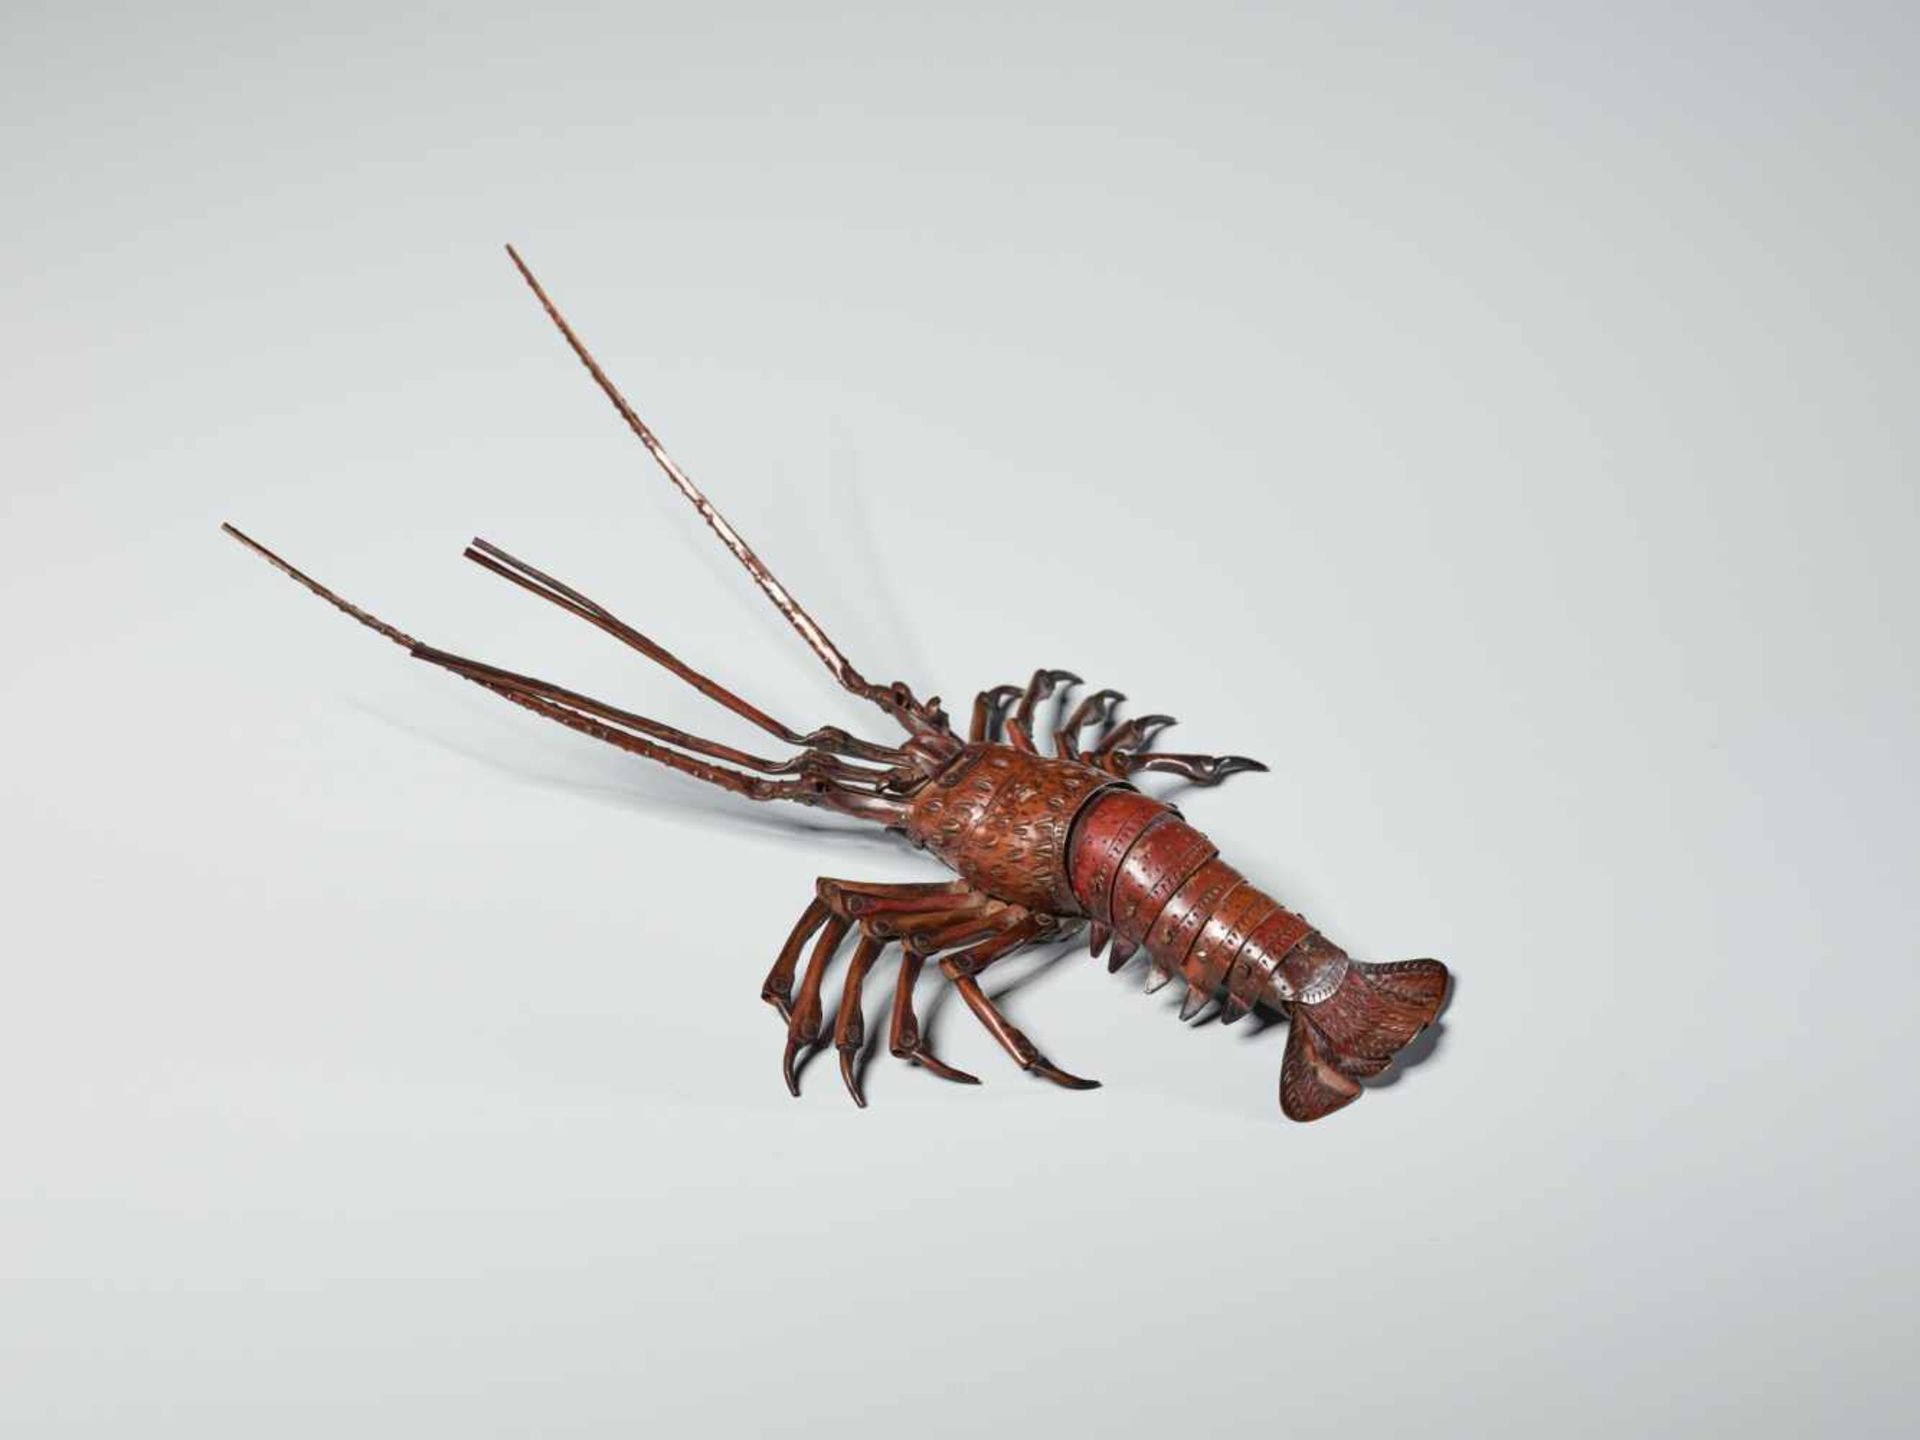 A PAIR OF FULLY ARTICULATED JIZAI OKIMONO DEPICTING EBI (SPINY LOBSTER) BY HIROYOSHICopperJapan, - Image 11 of 15